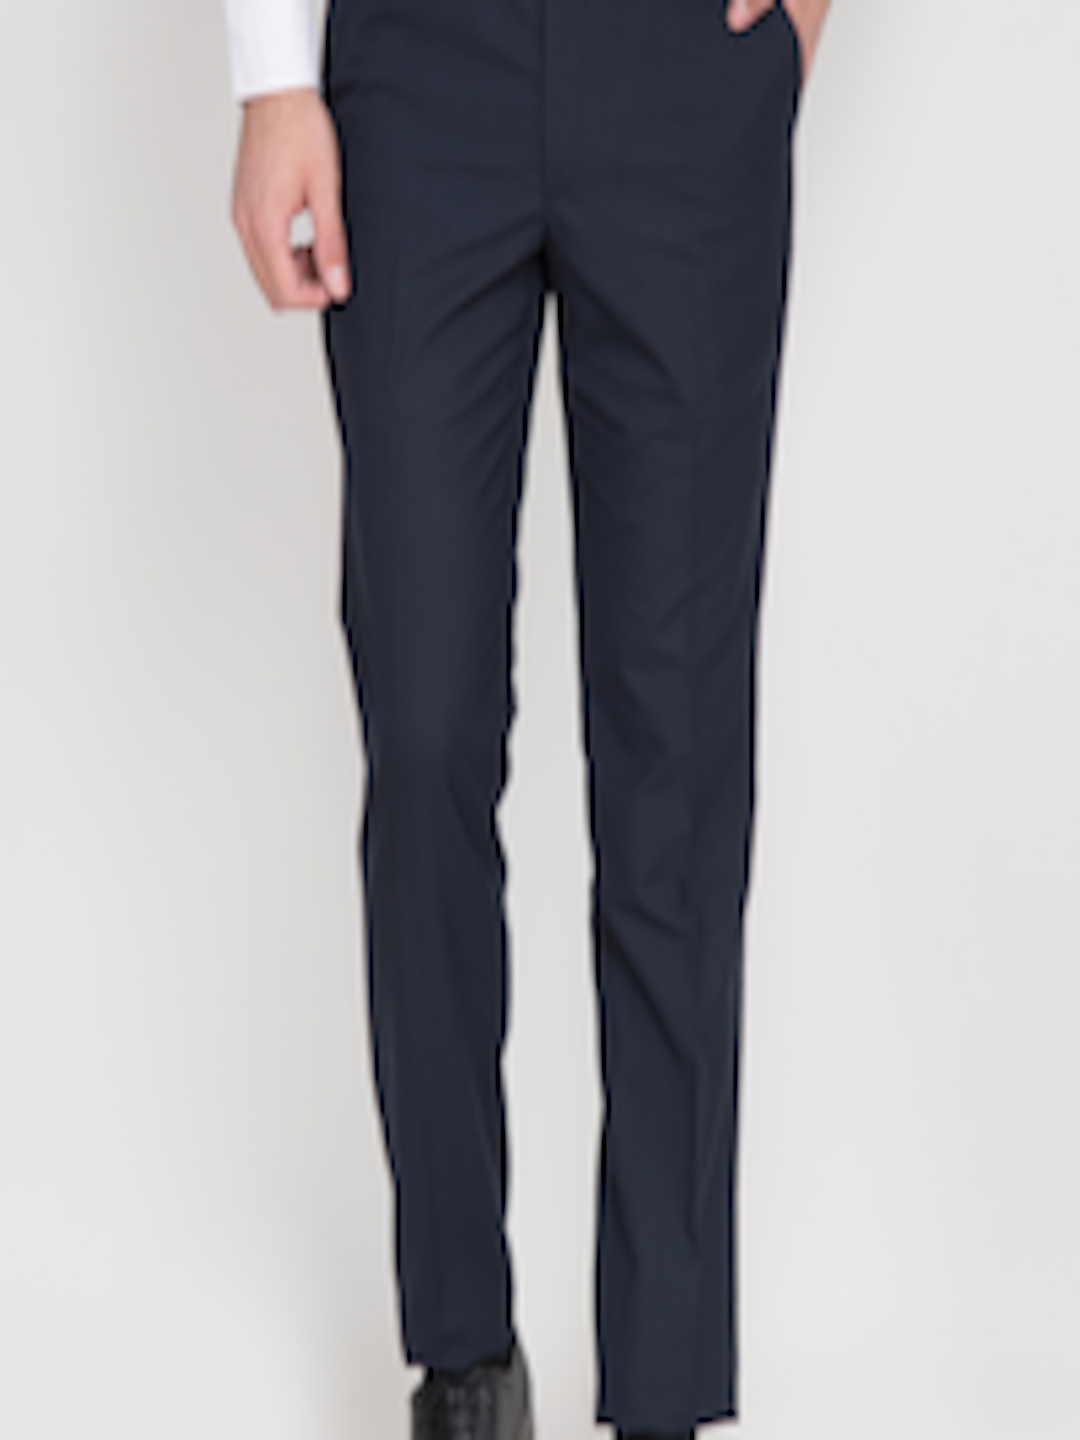 Buy Black Coffee Navy Formal Trousers - Trousers for Men 1728503 | Myntra